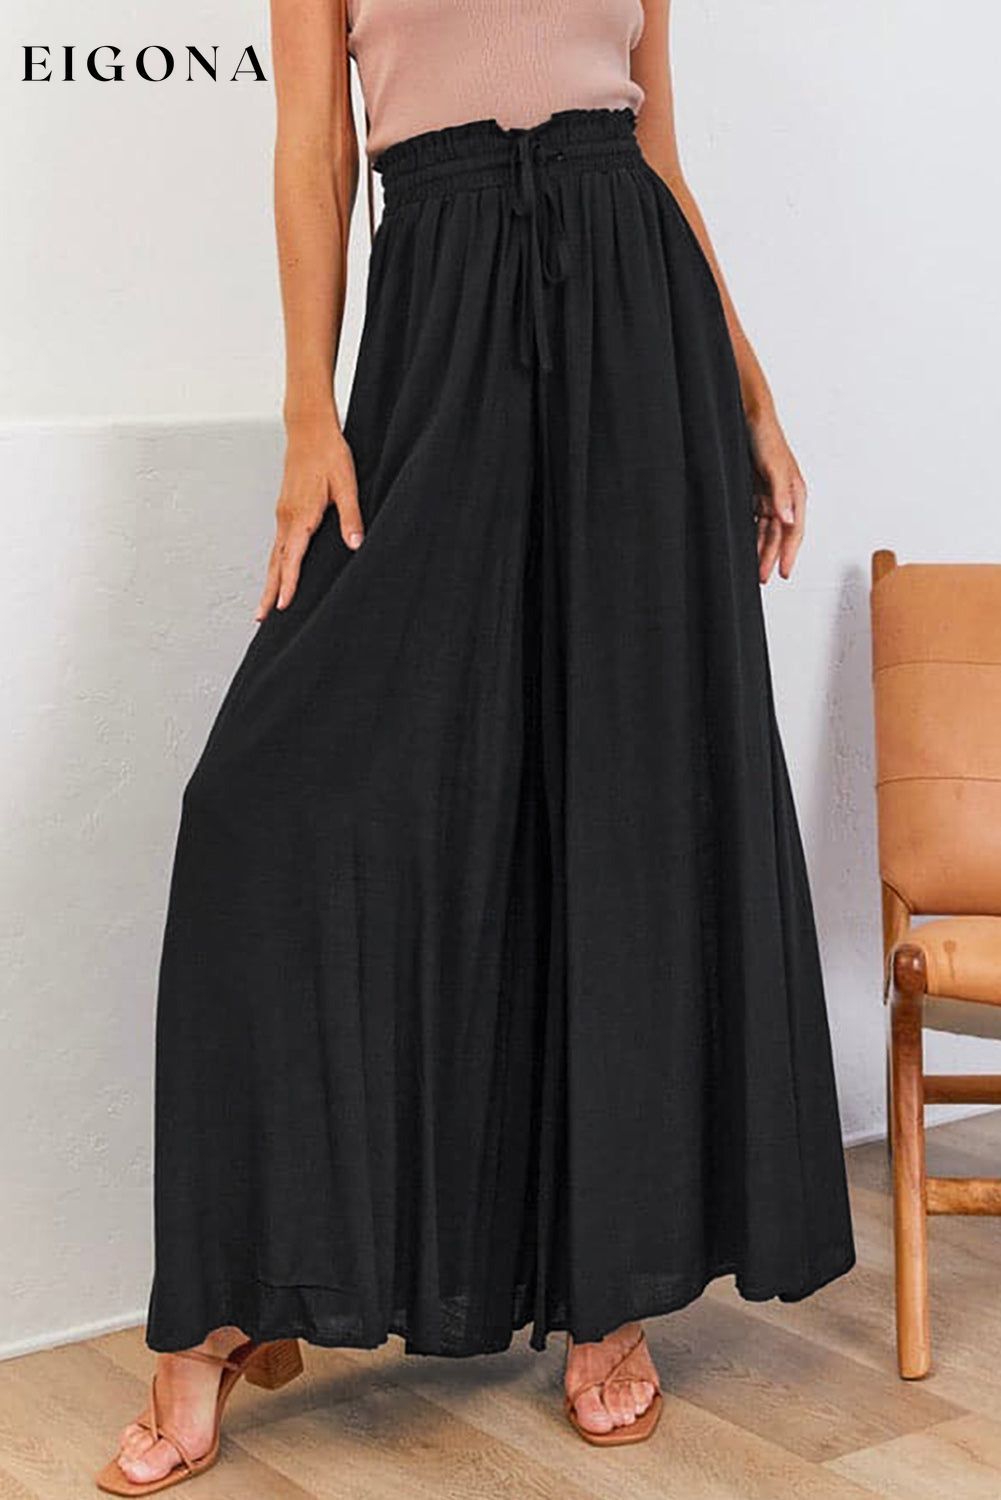 Black Drawstring Smocked High Waist Wide Leg Pants Black 100%Viscose All In Stock bottoms clothes clothing Occasion Vacation Print Solid Color Season Summer Silhouette Wide Leg Style Casual wide leg pants Women's Bottoms